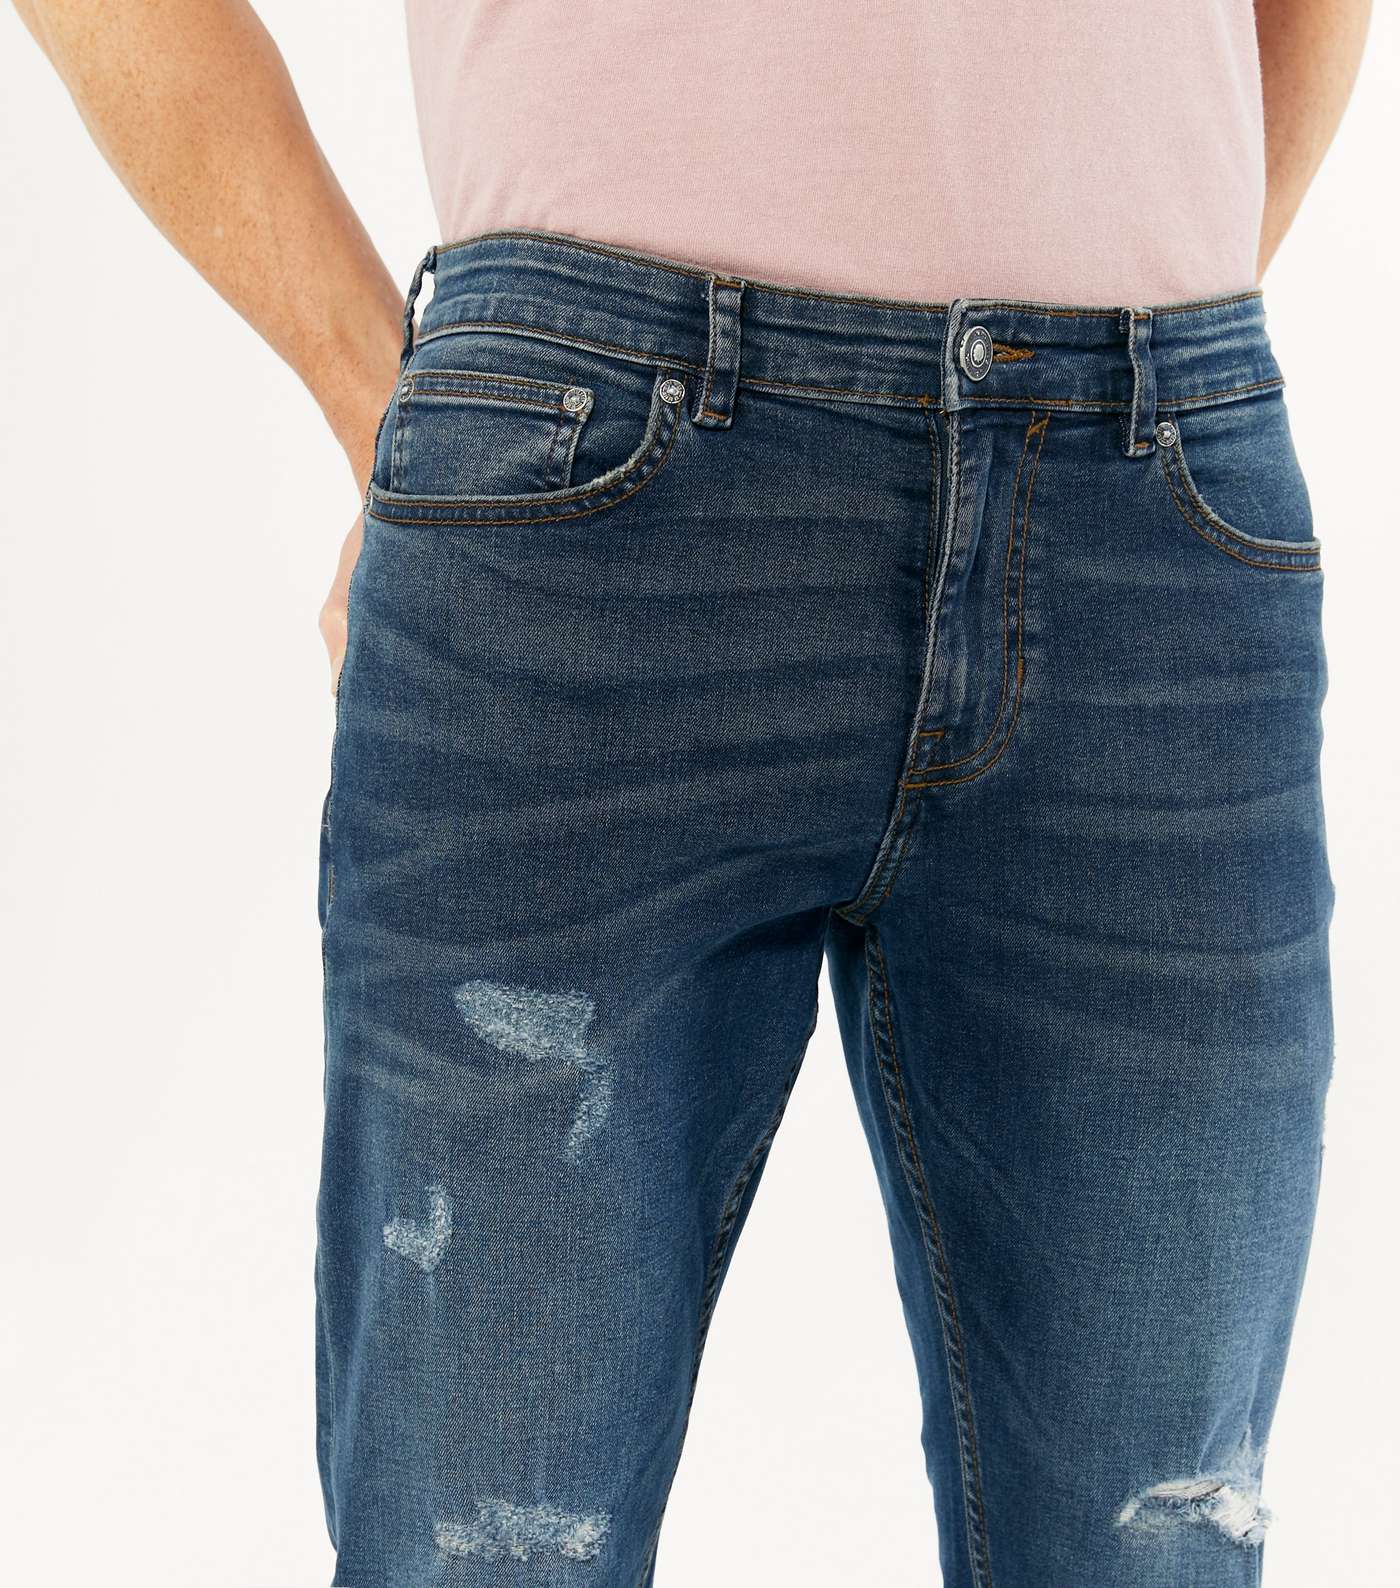 Blue Rinse Wash Ripped Slim Stretch Jeans Image 3